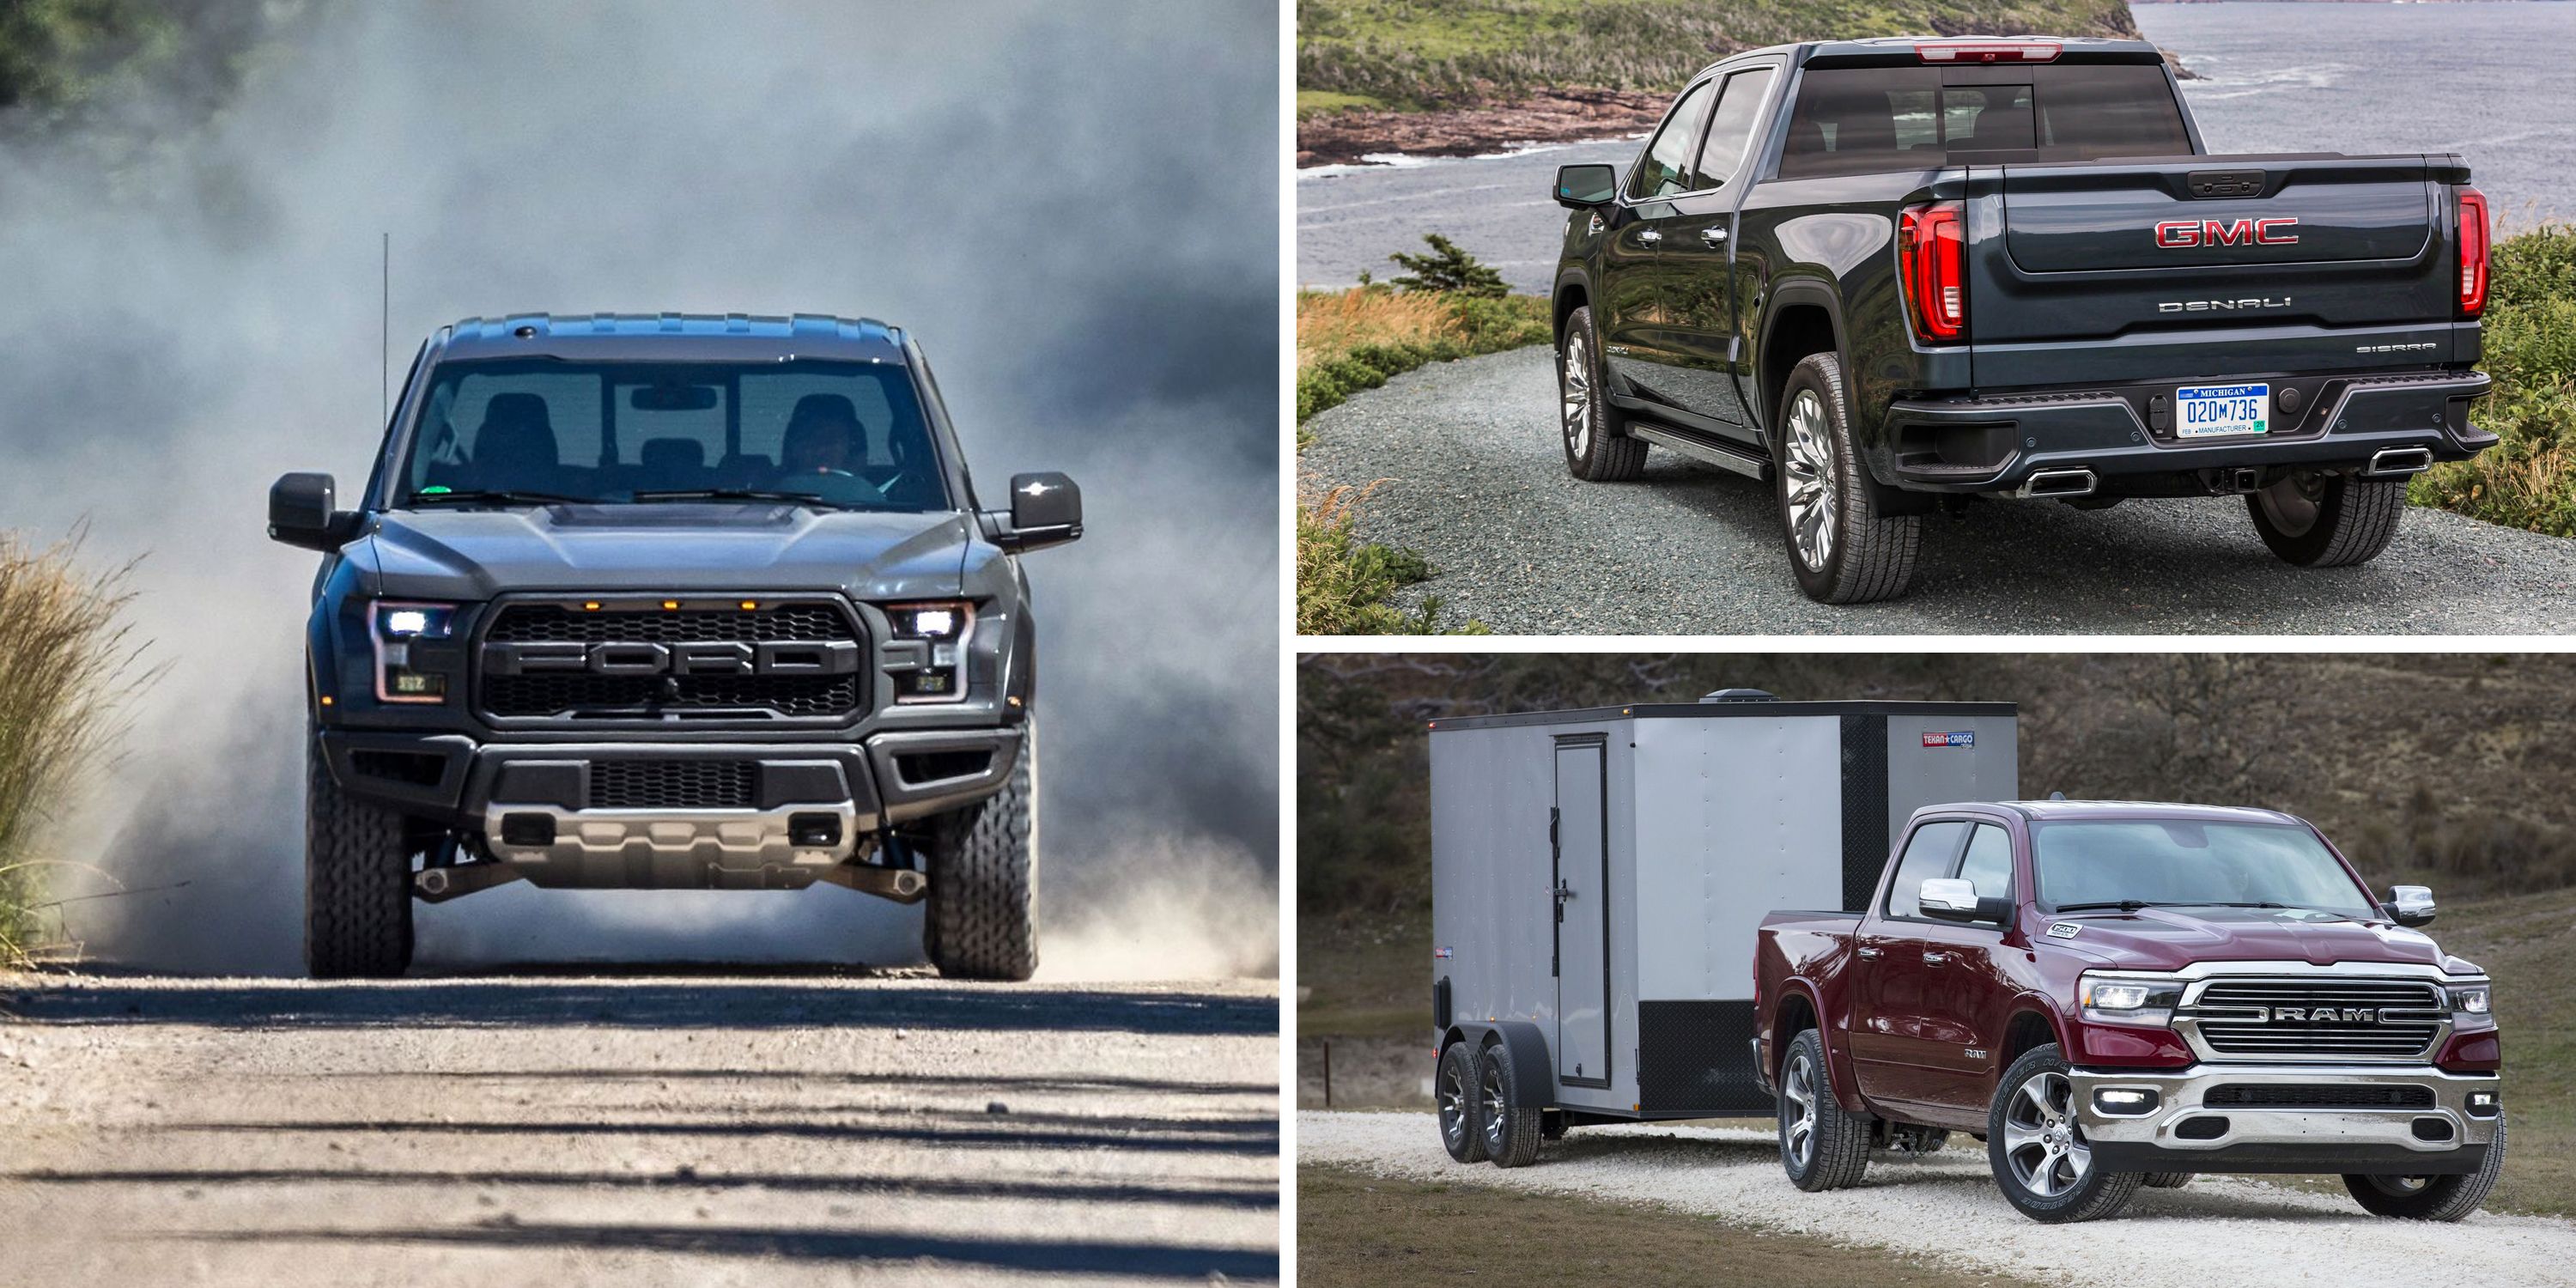 Truck Towing Capacity Comparison Chart